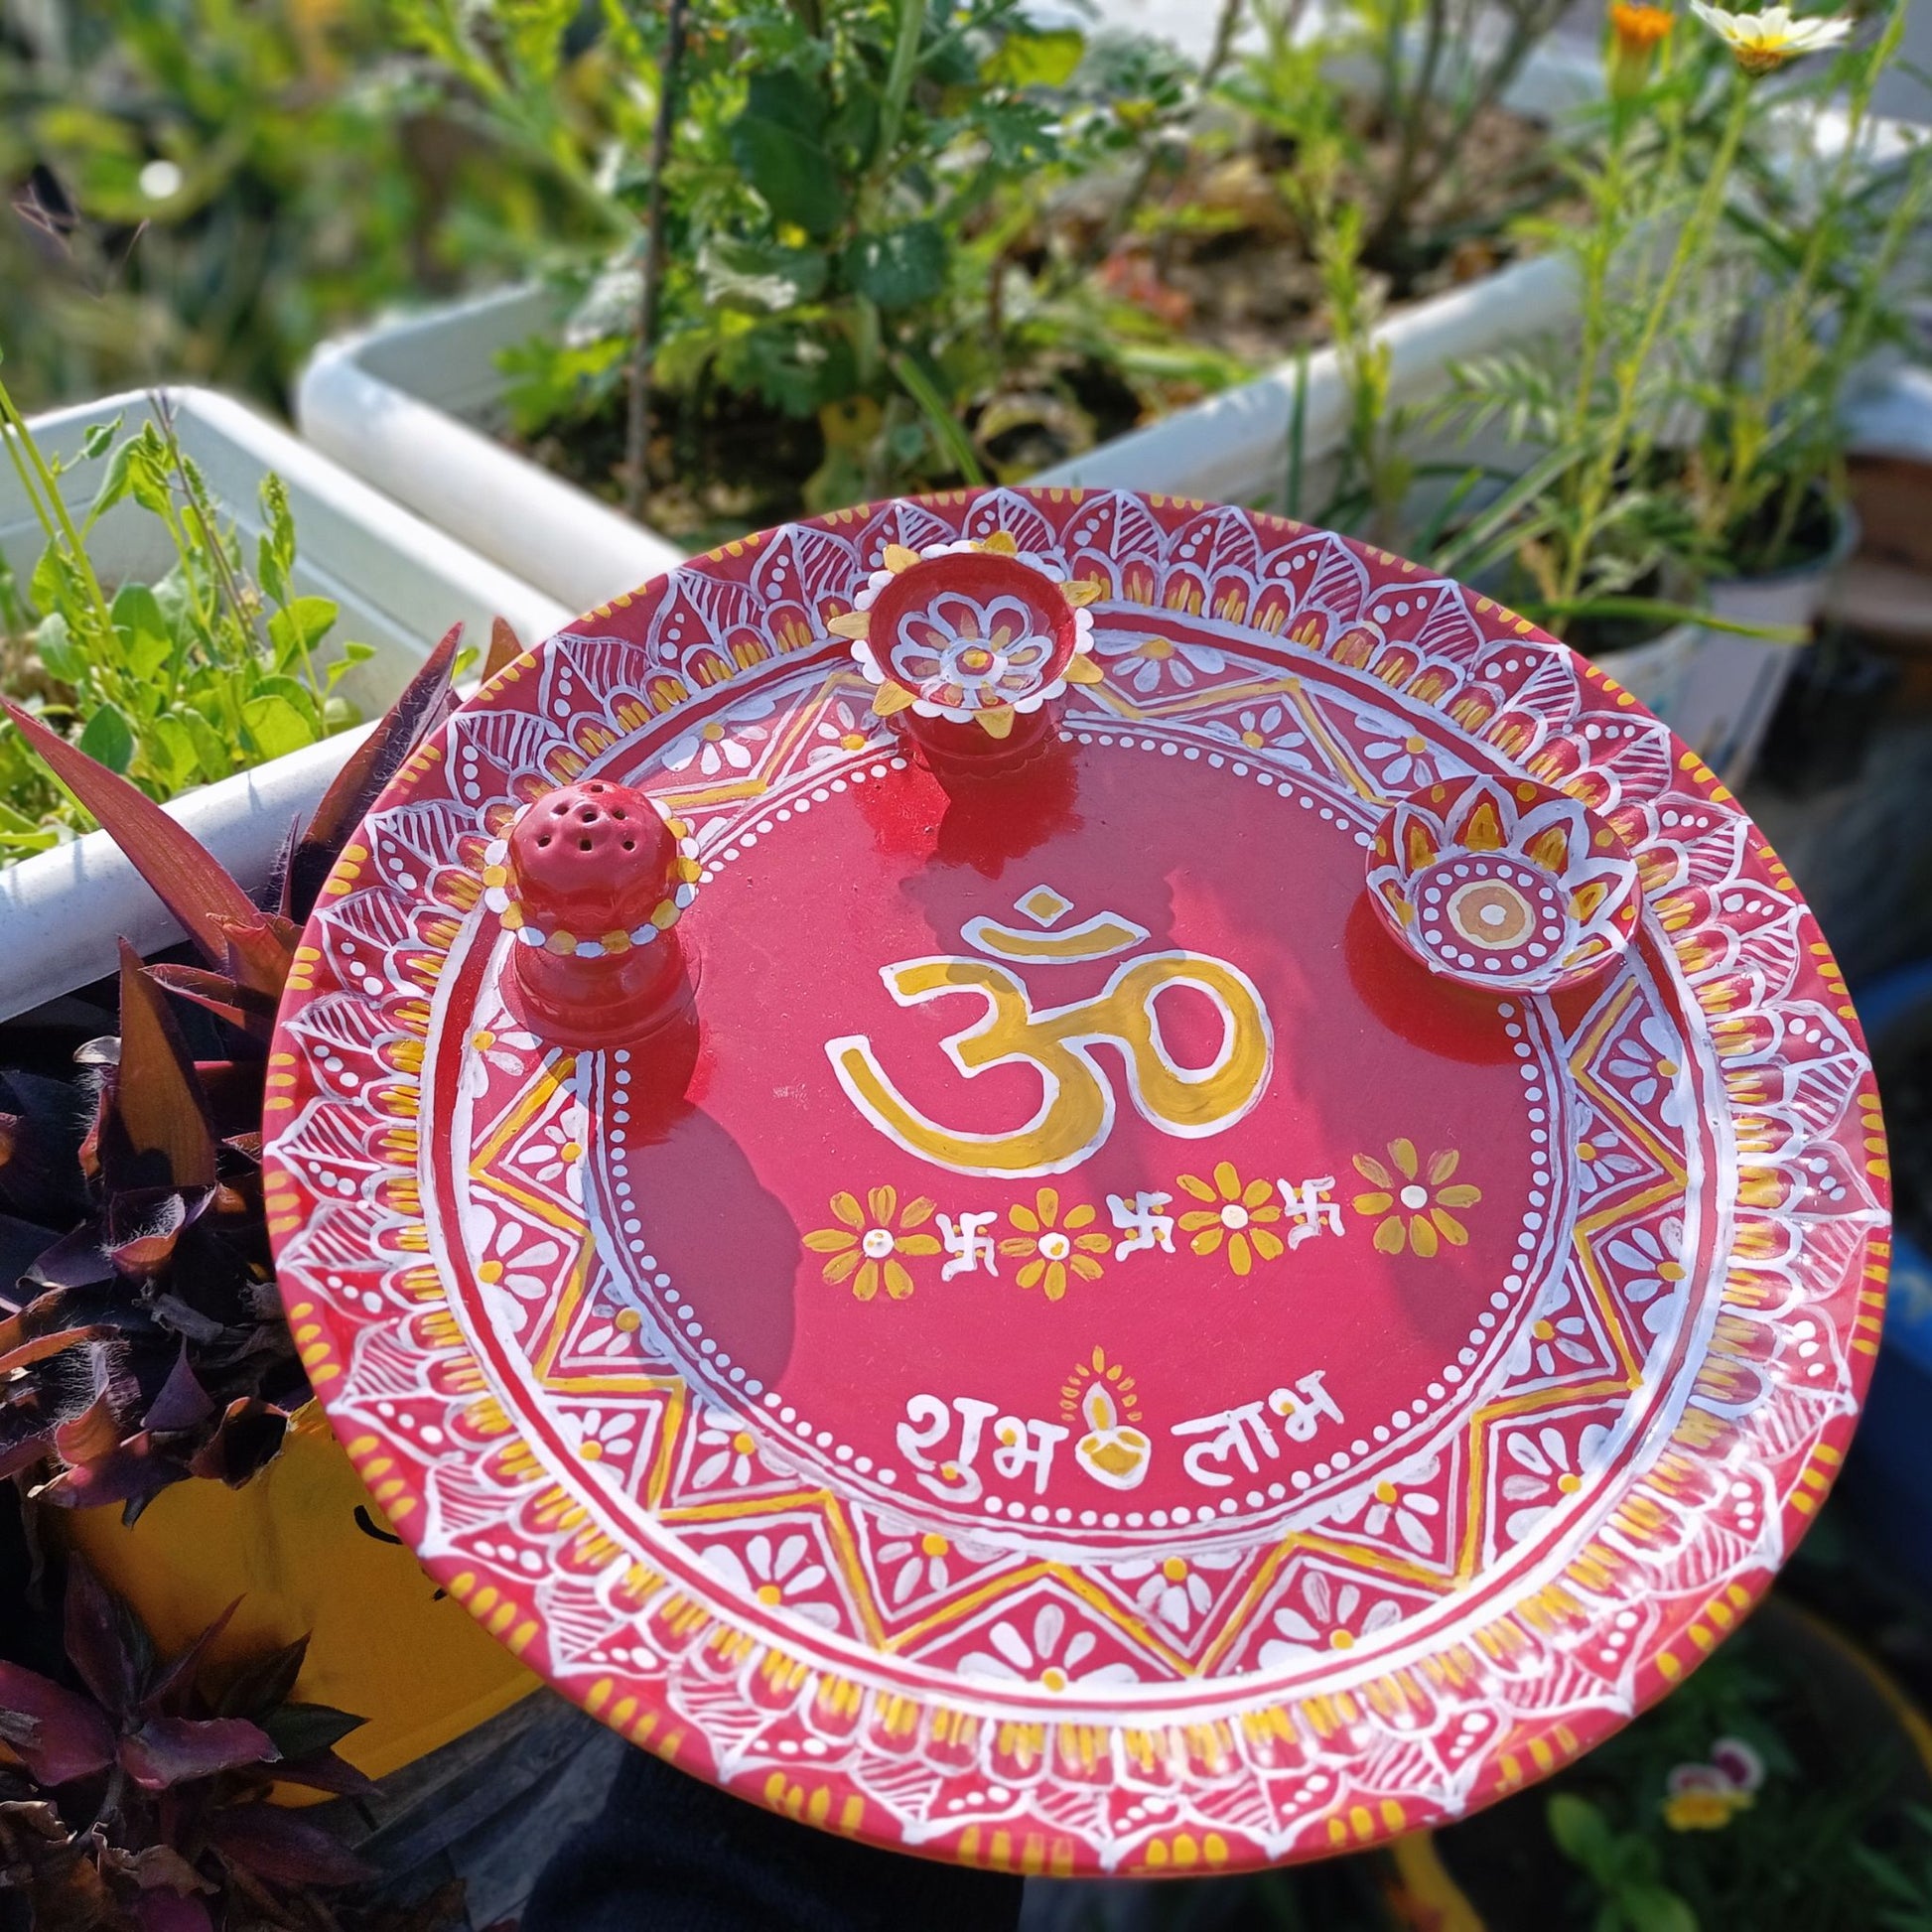 Large Size Hand Painted Puja Thalis for all occasions. Whether its Diwali, Bhaiya Dooj, Karwa Chauth, these hand painted aipan inspired puja thalis would be the perfect addition to your decor. Has different partitions each for diya/ lamp, tika / roli, chawal / rice and agarbatti too. 